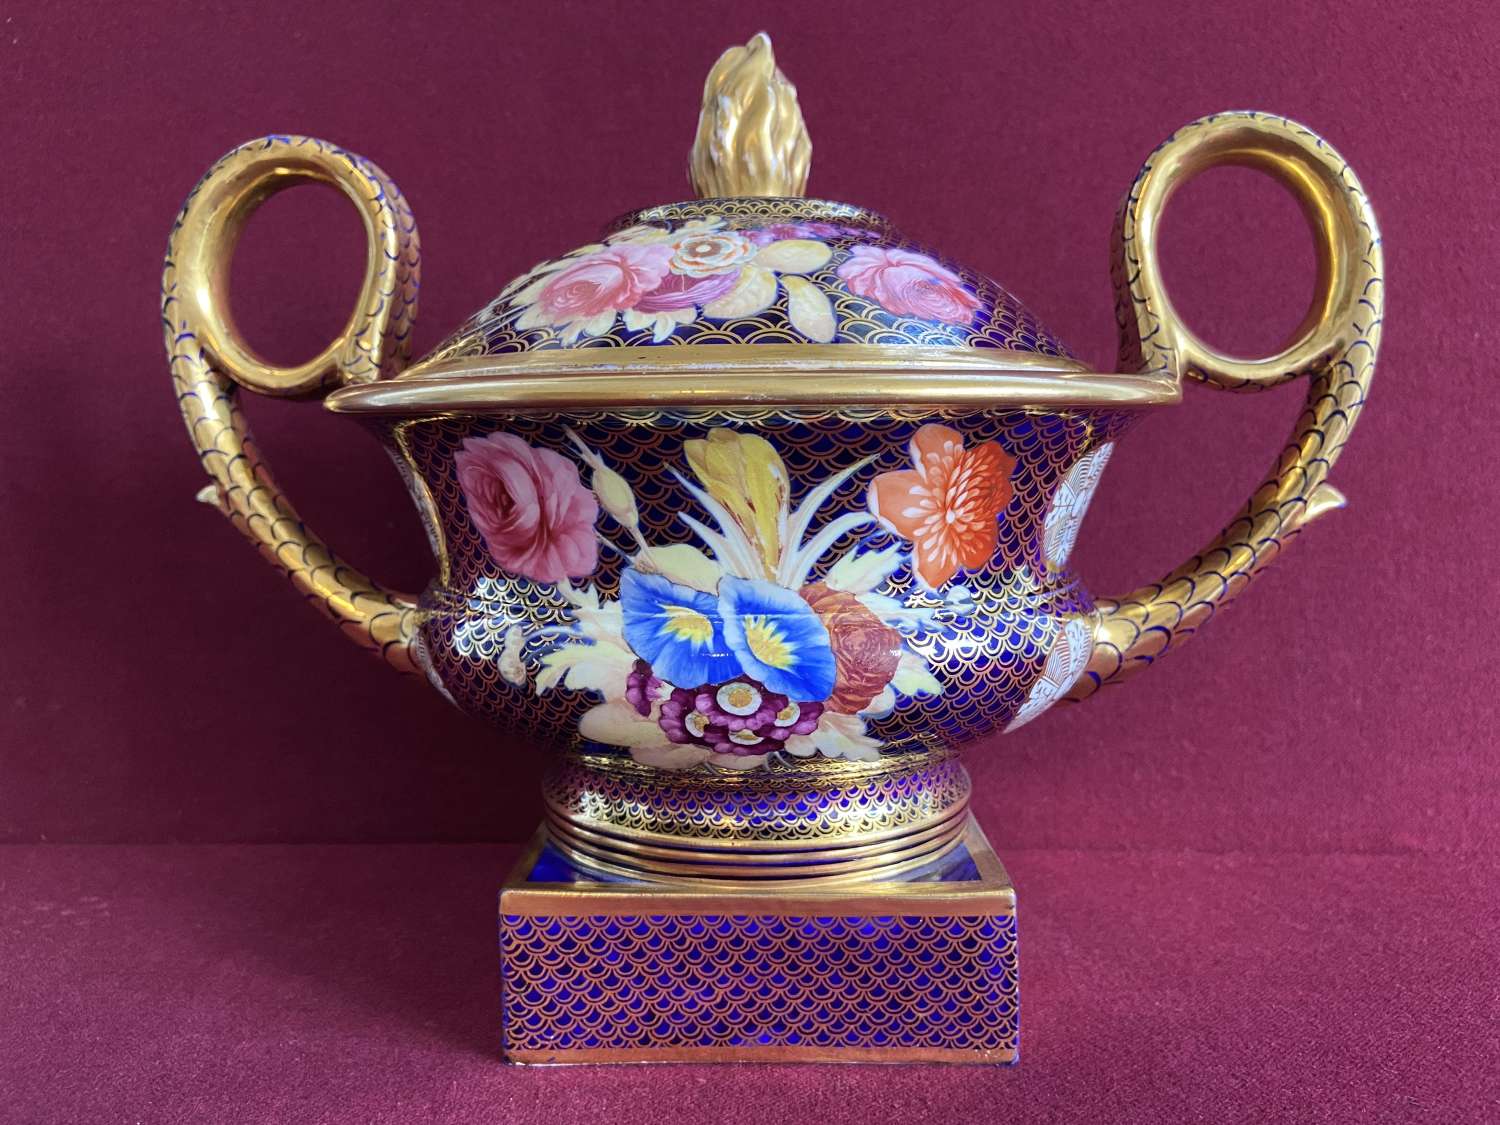 Spode Krater Vase c.1820 decorated in pattern 1166